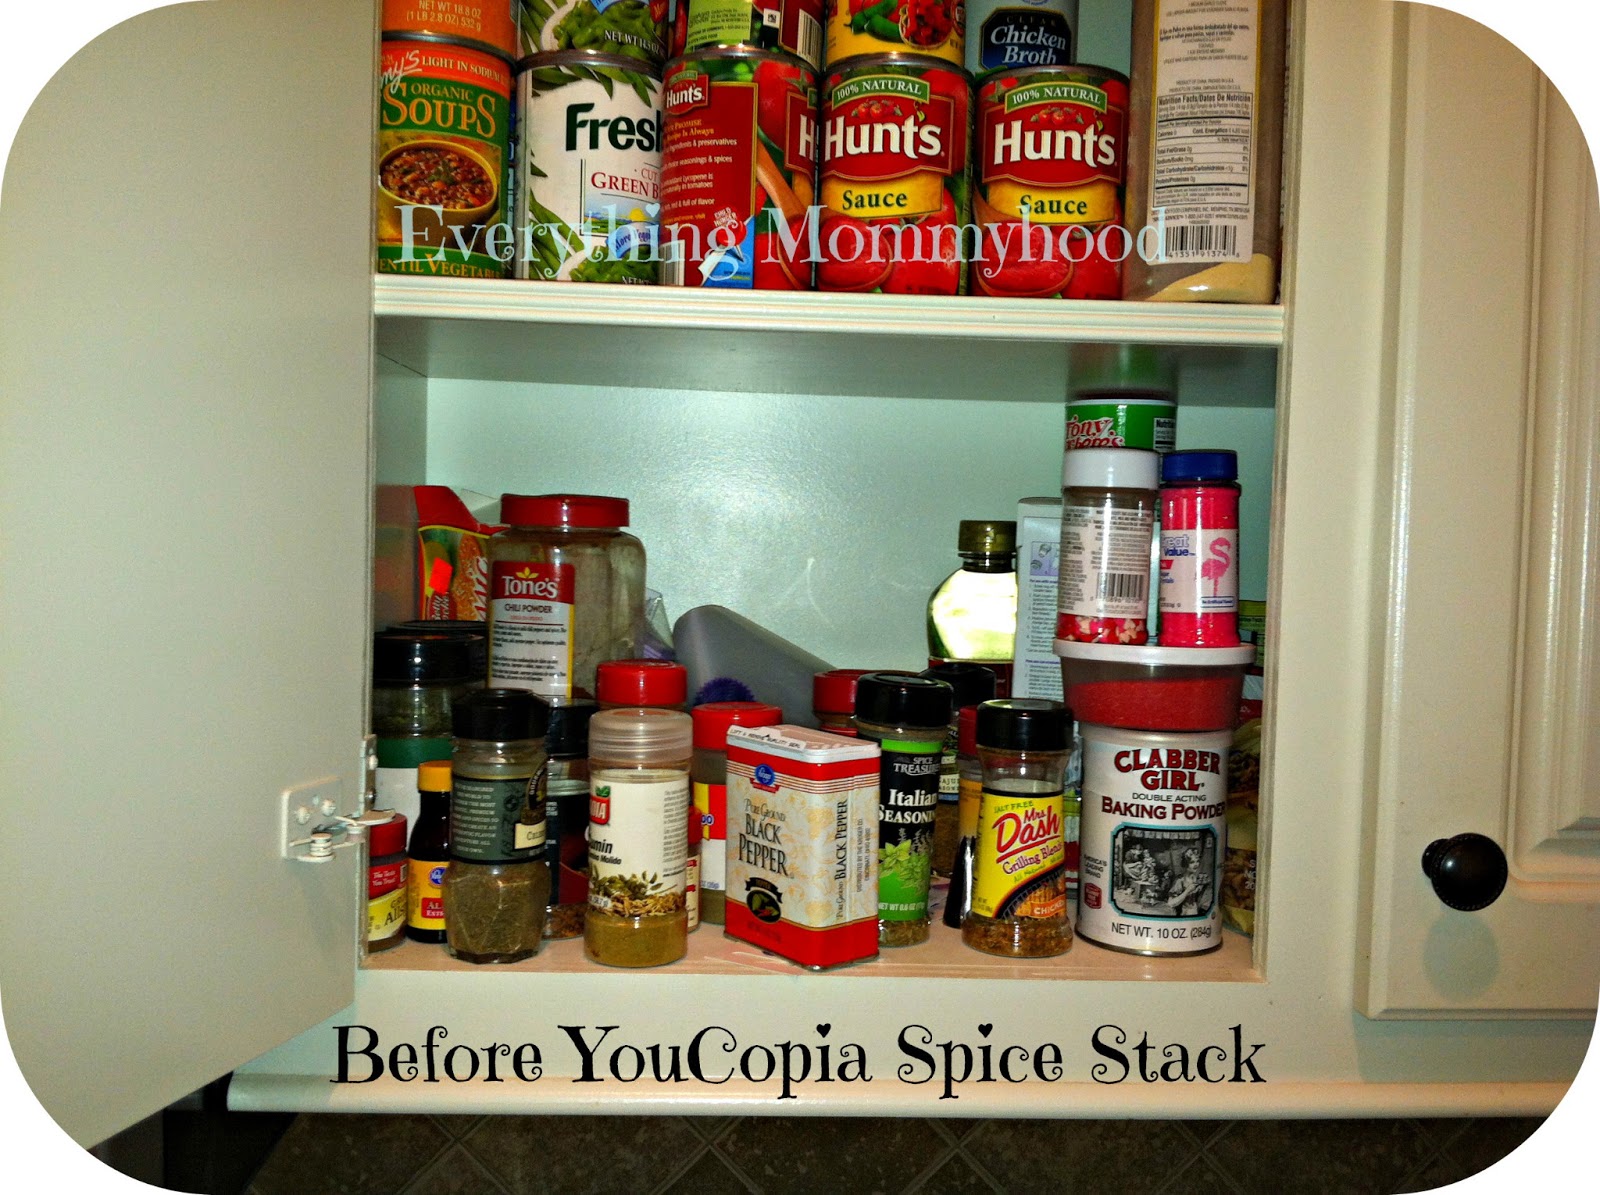 YouCopia Original SpiceStack 18-Bottle Spice Rack Organizer with